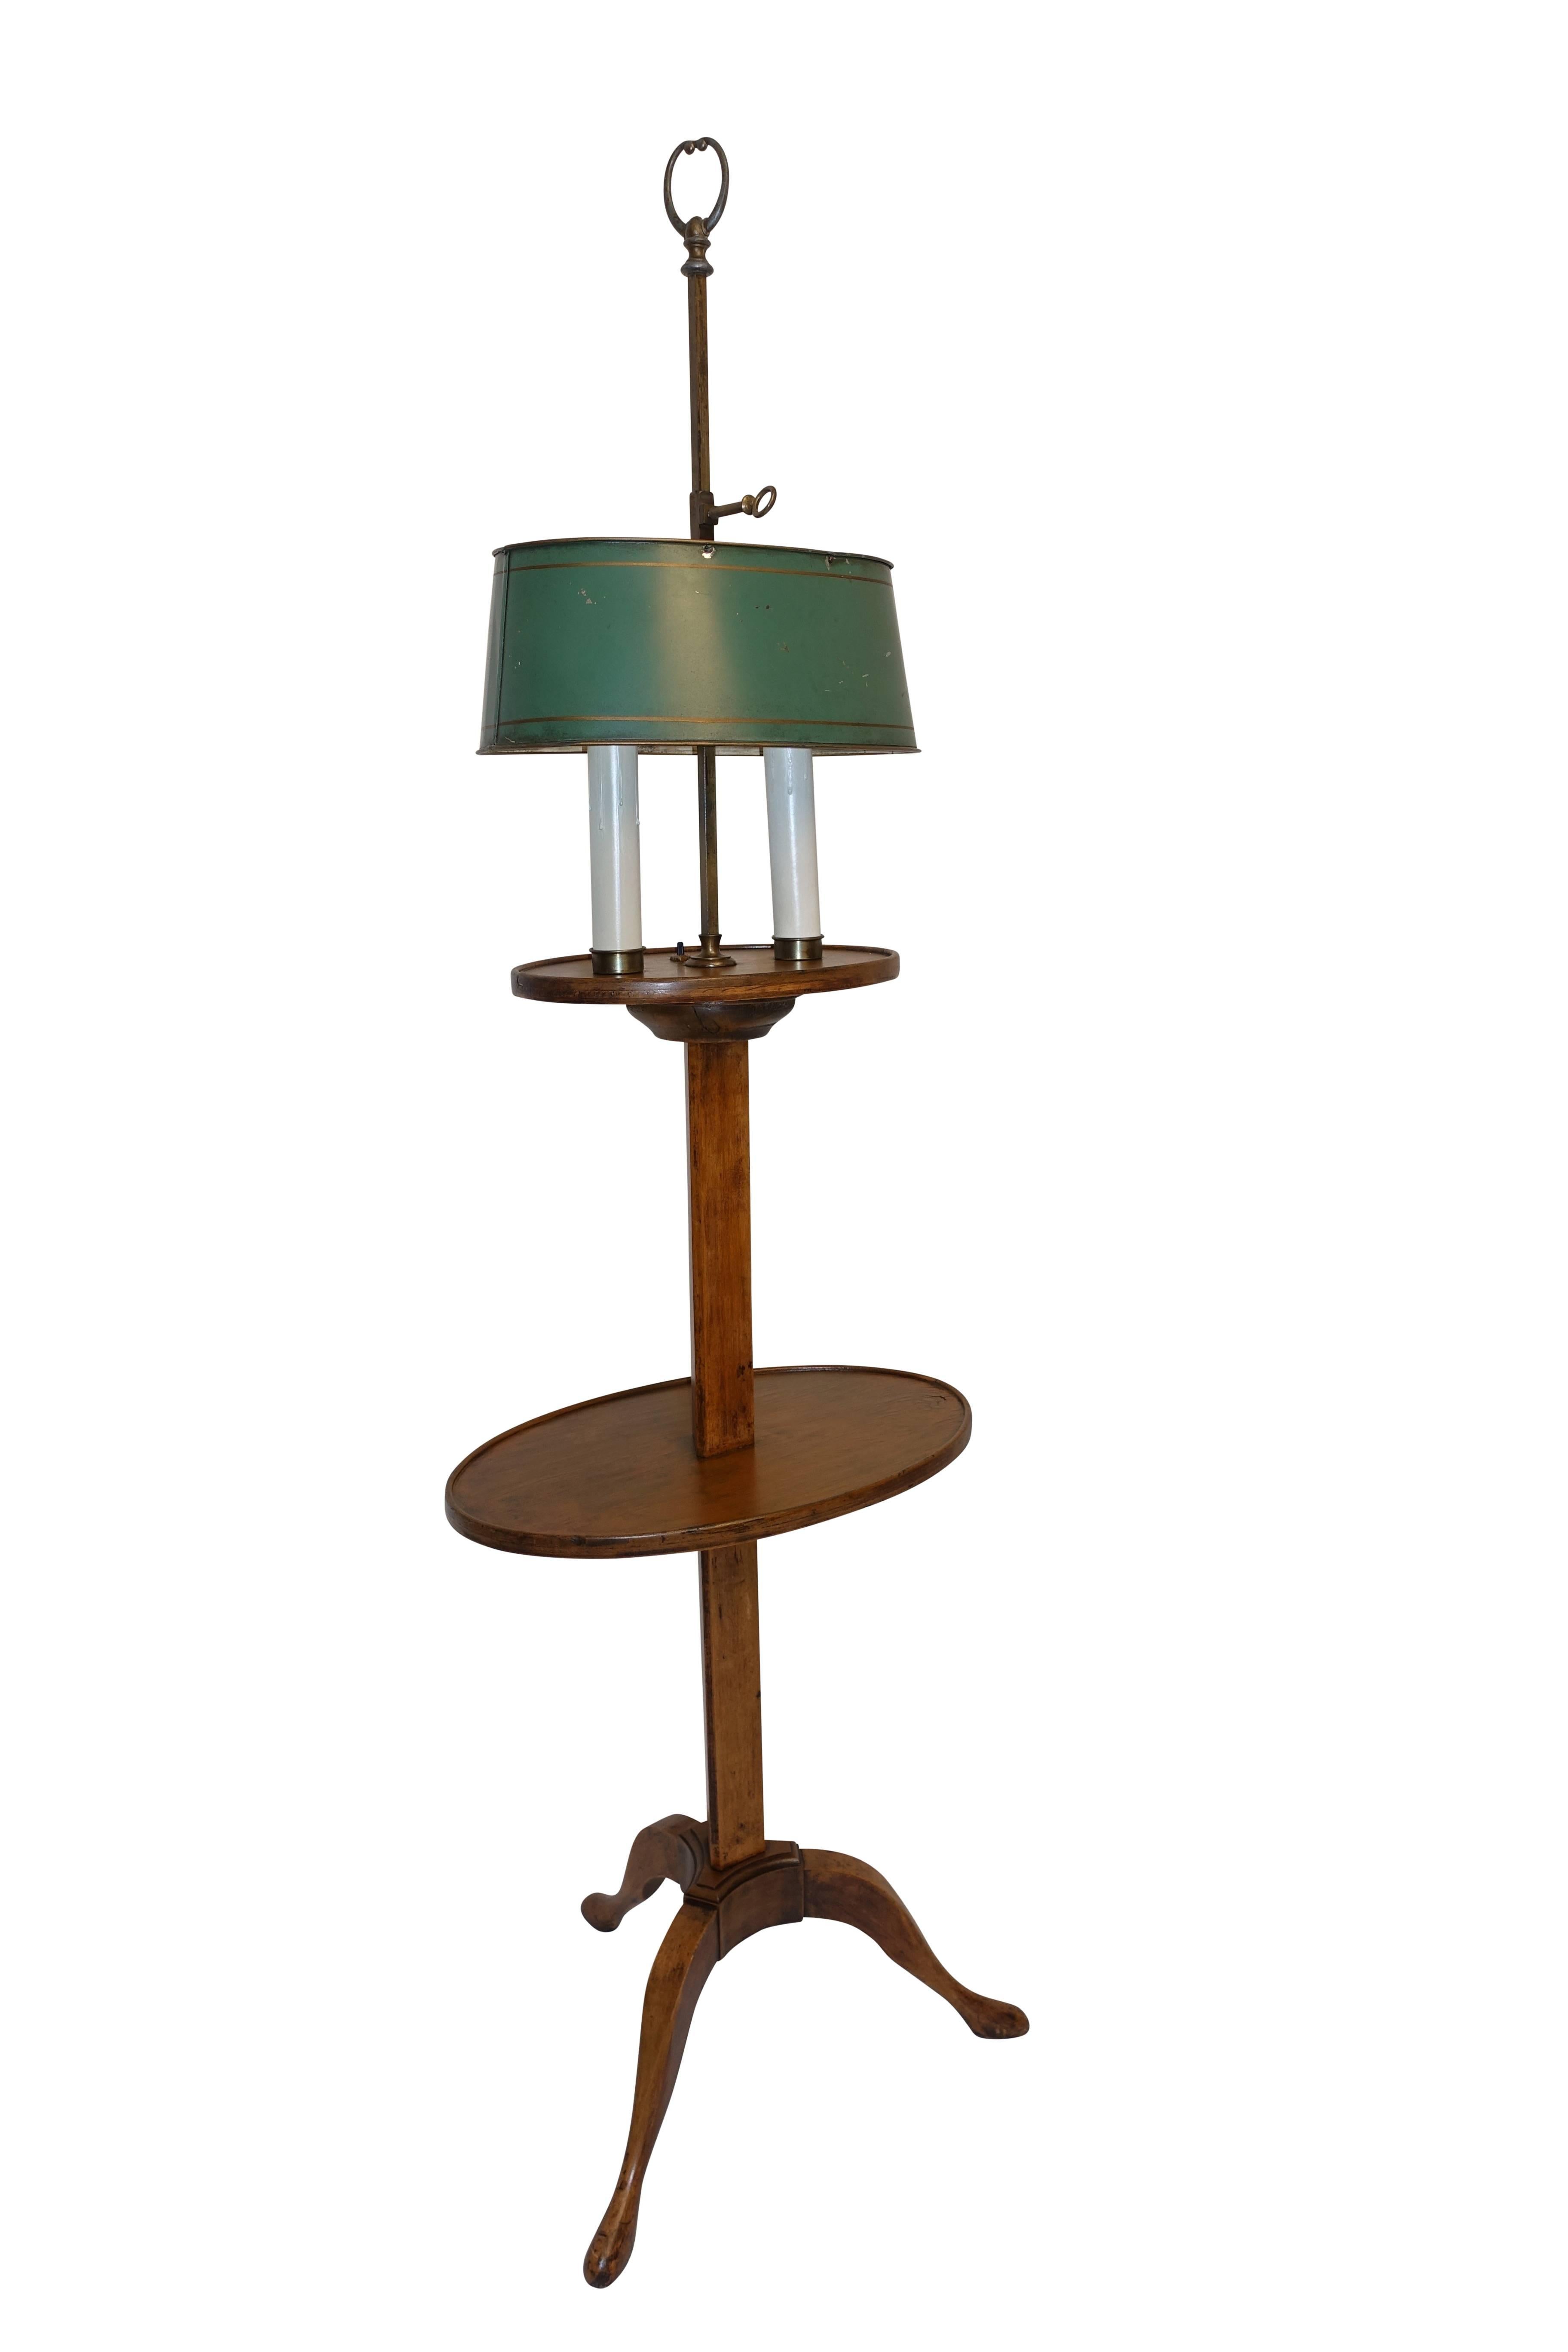 Fruitwood Bouillotte Candle Stand Lamp with Tole Shade, French, 19th Century